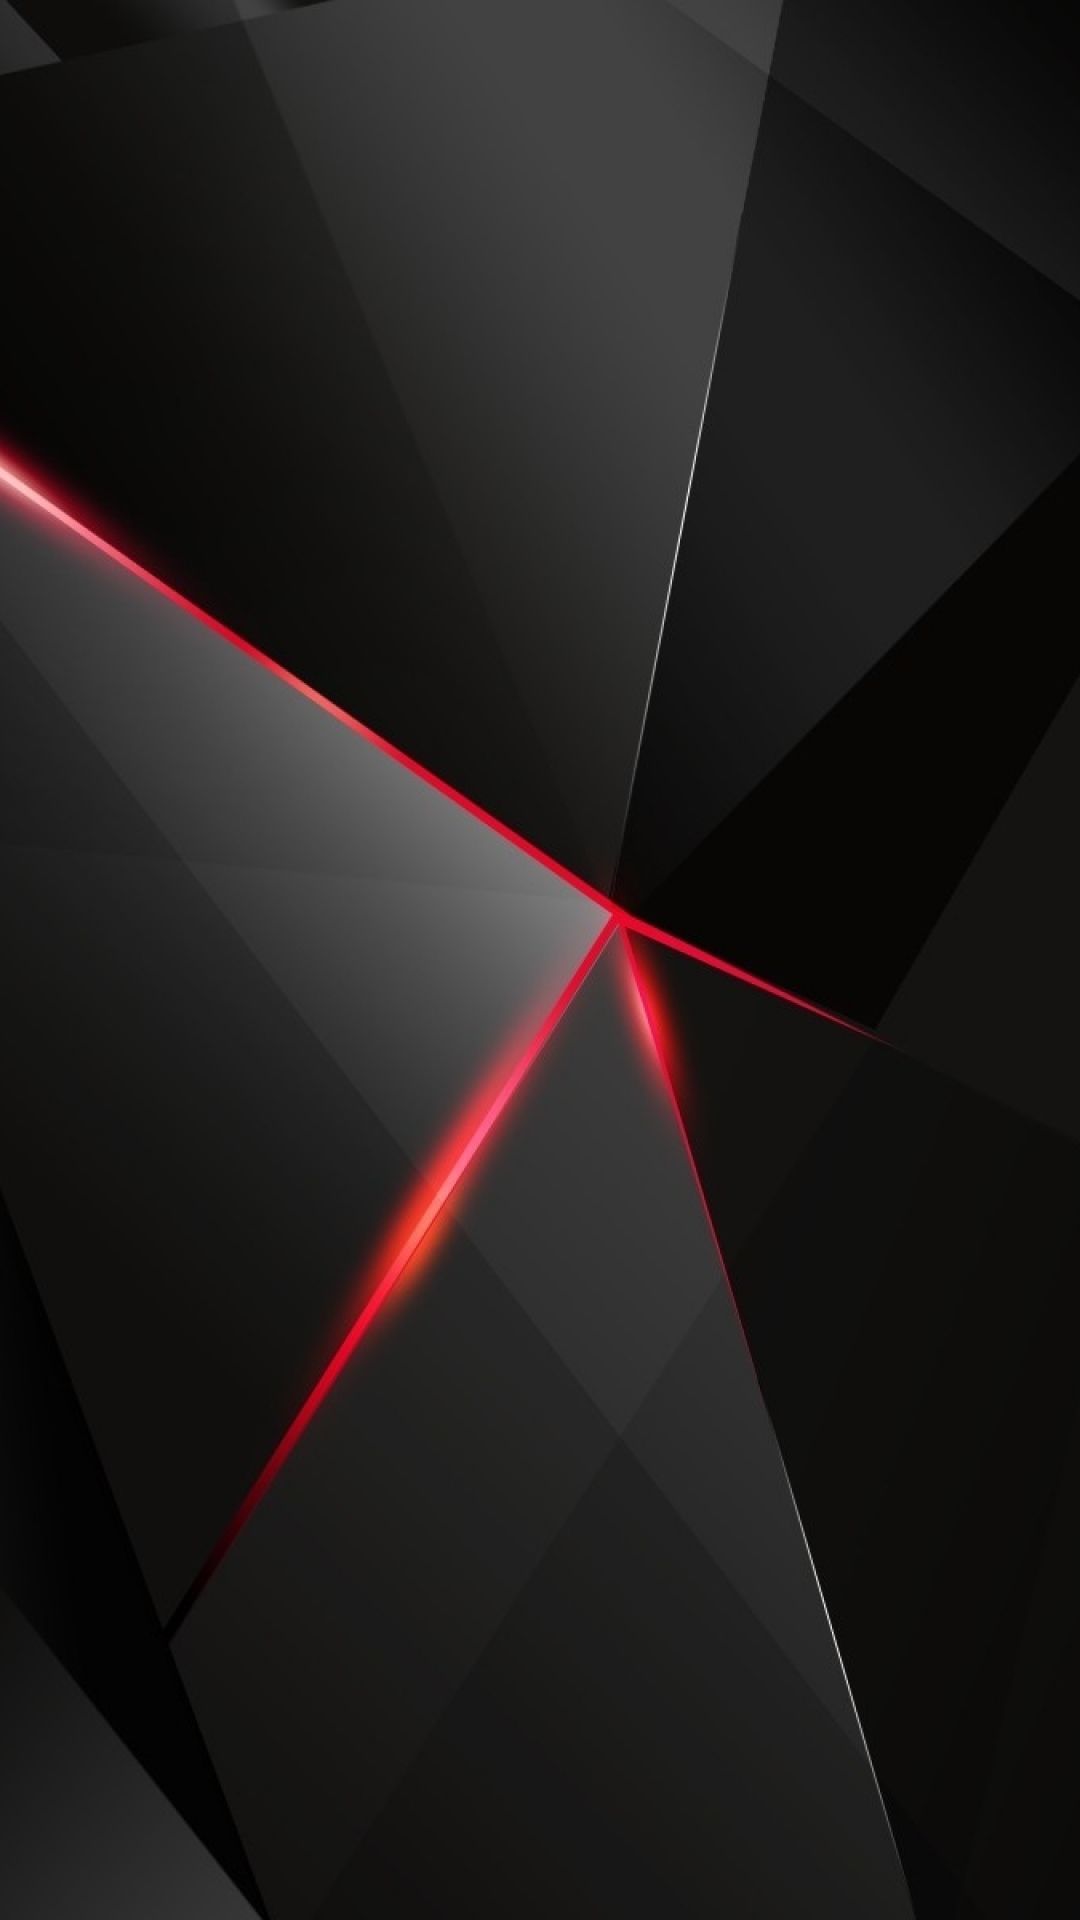 1080x1920 - Android Live Wallpapers, Android wallpapers, Android